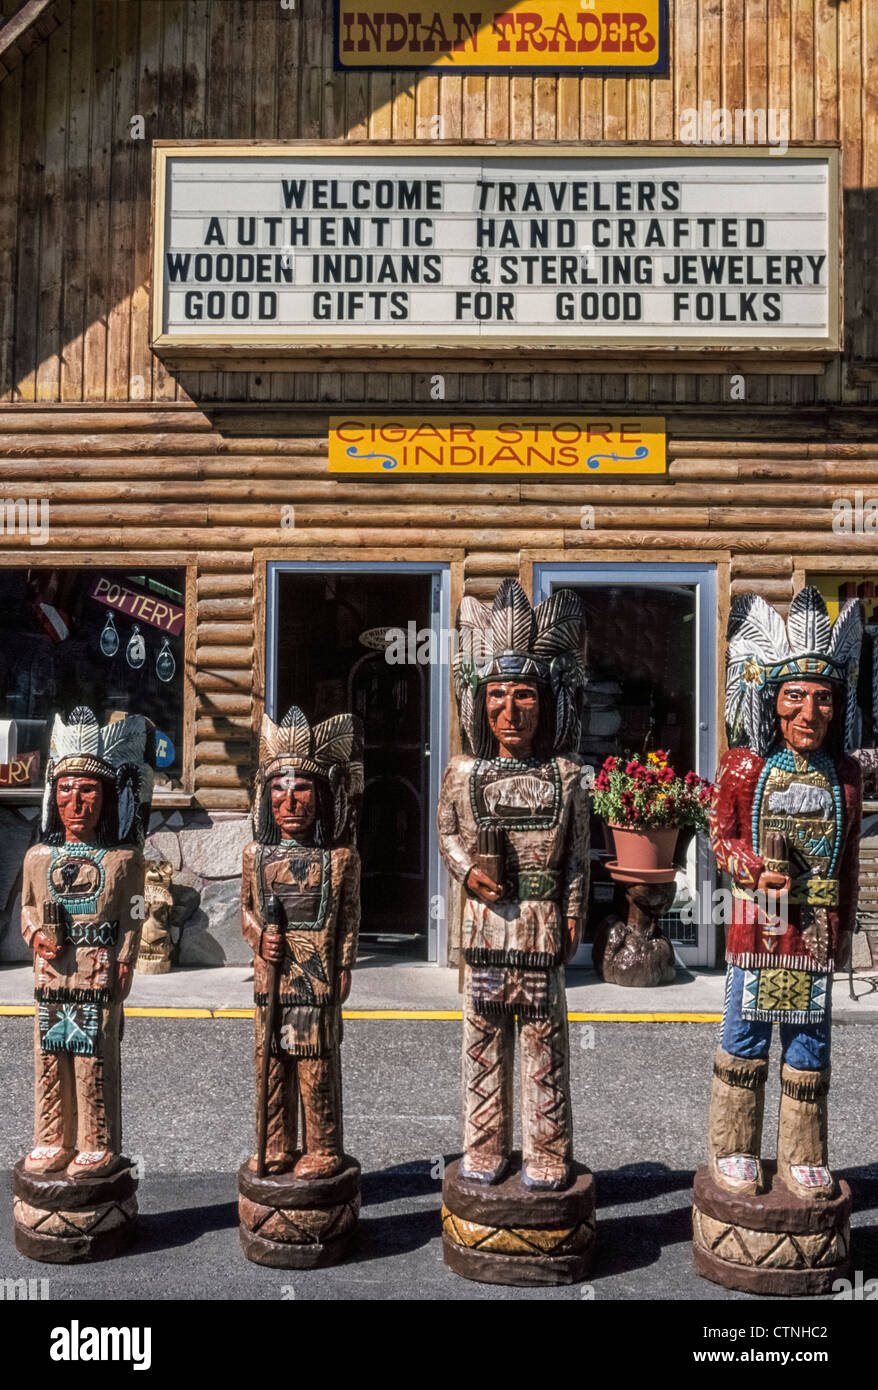 Four hand-carved cigar store wooden Indians are lined up for sale in